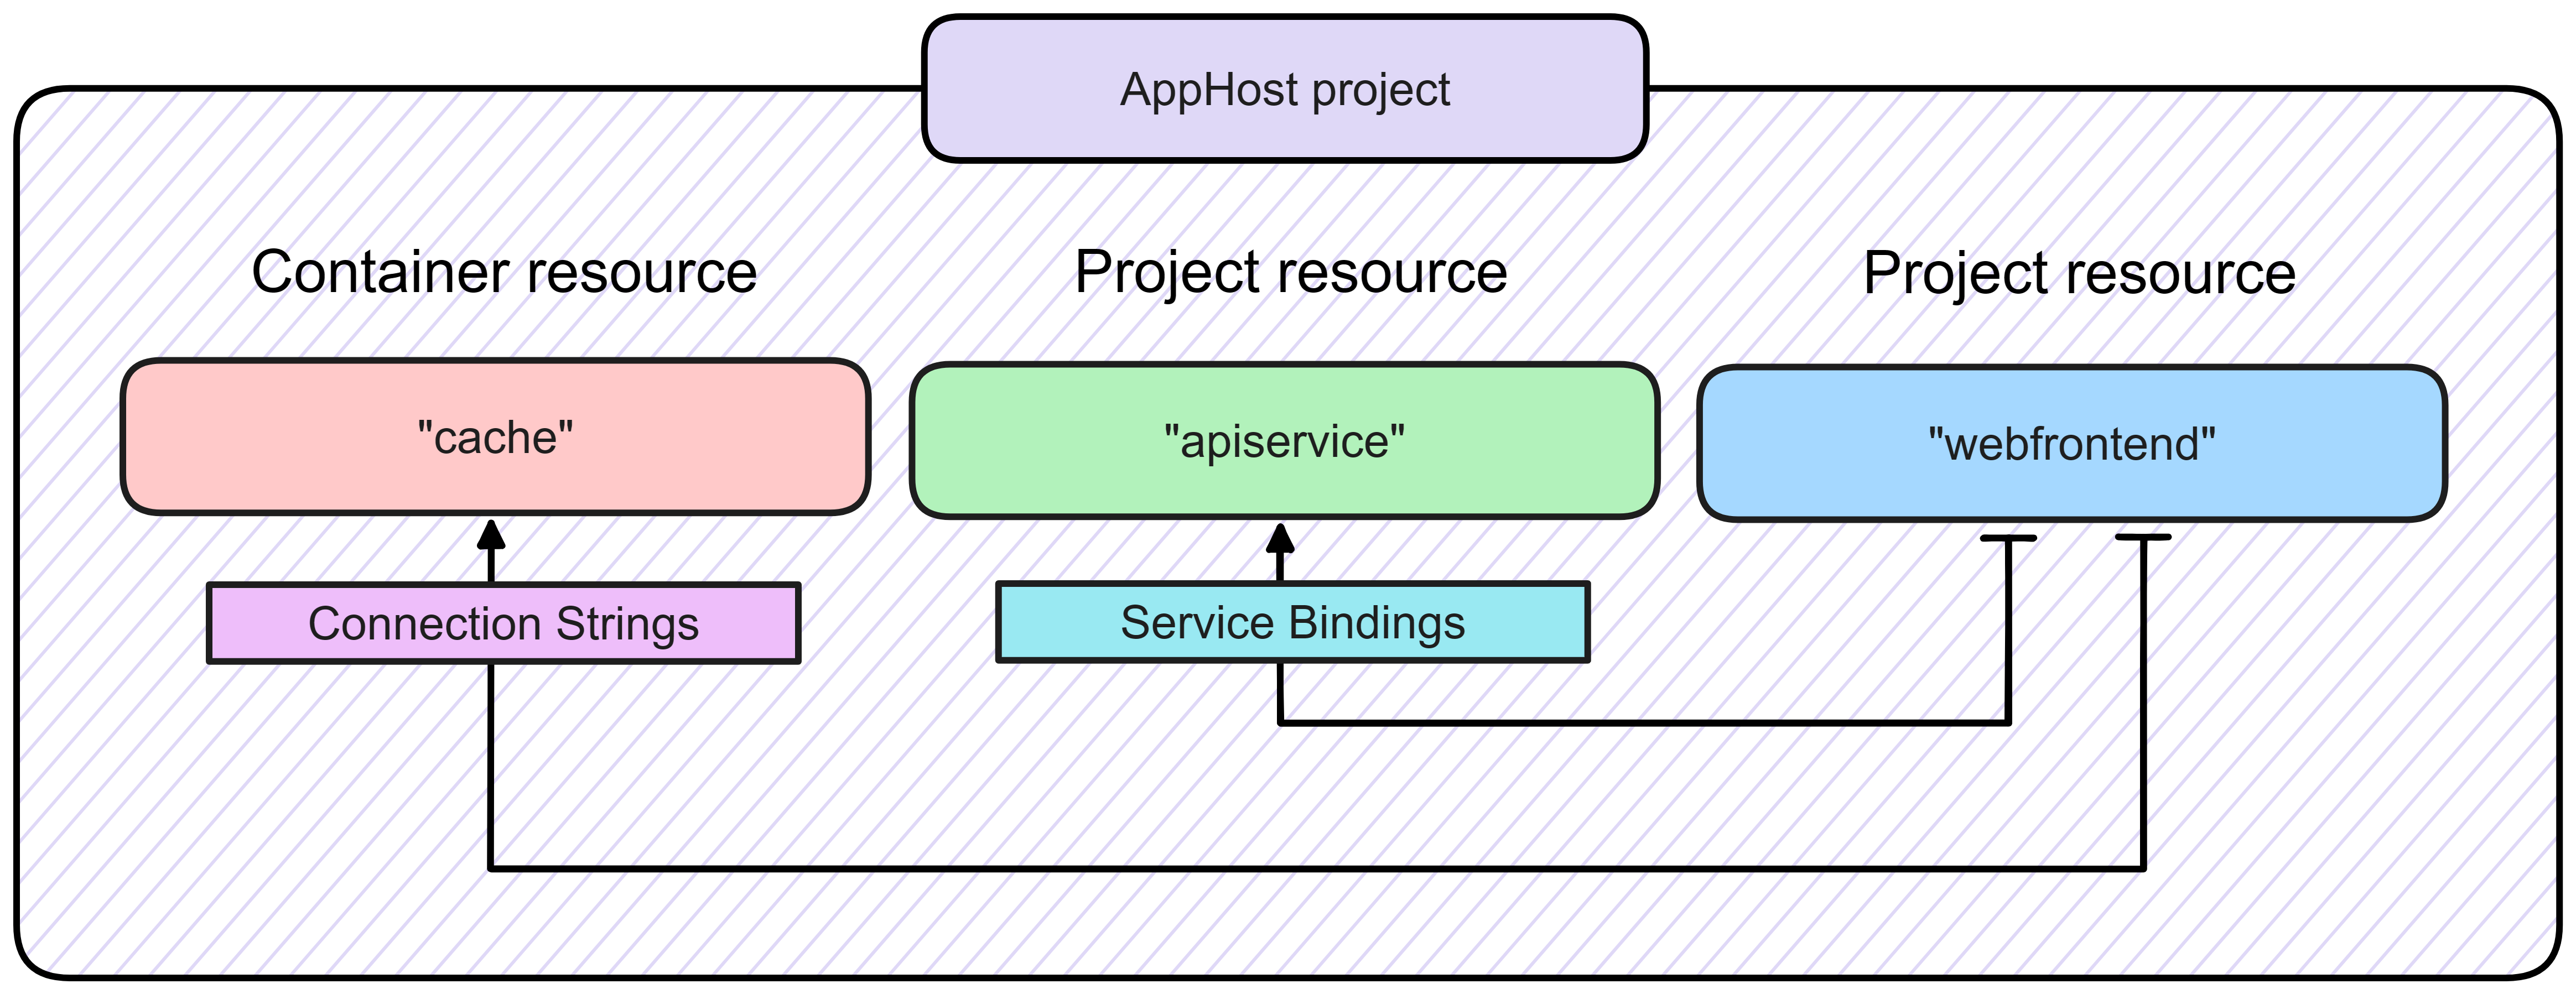 A diagram showing the relationship between the .NET Aspire AppHost project and the other services in an app.